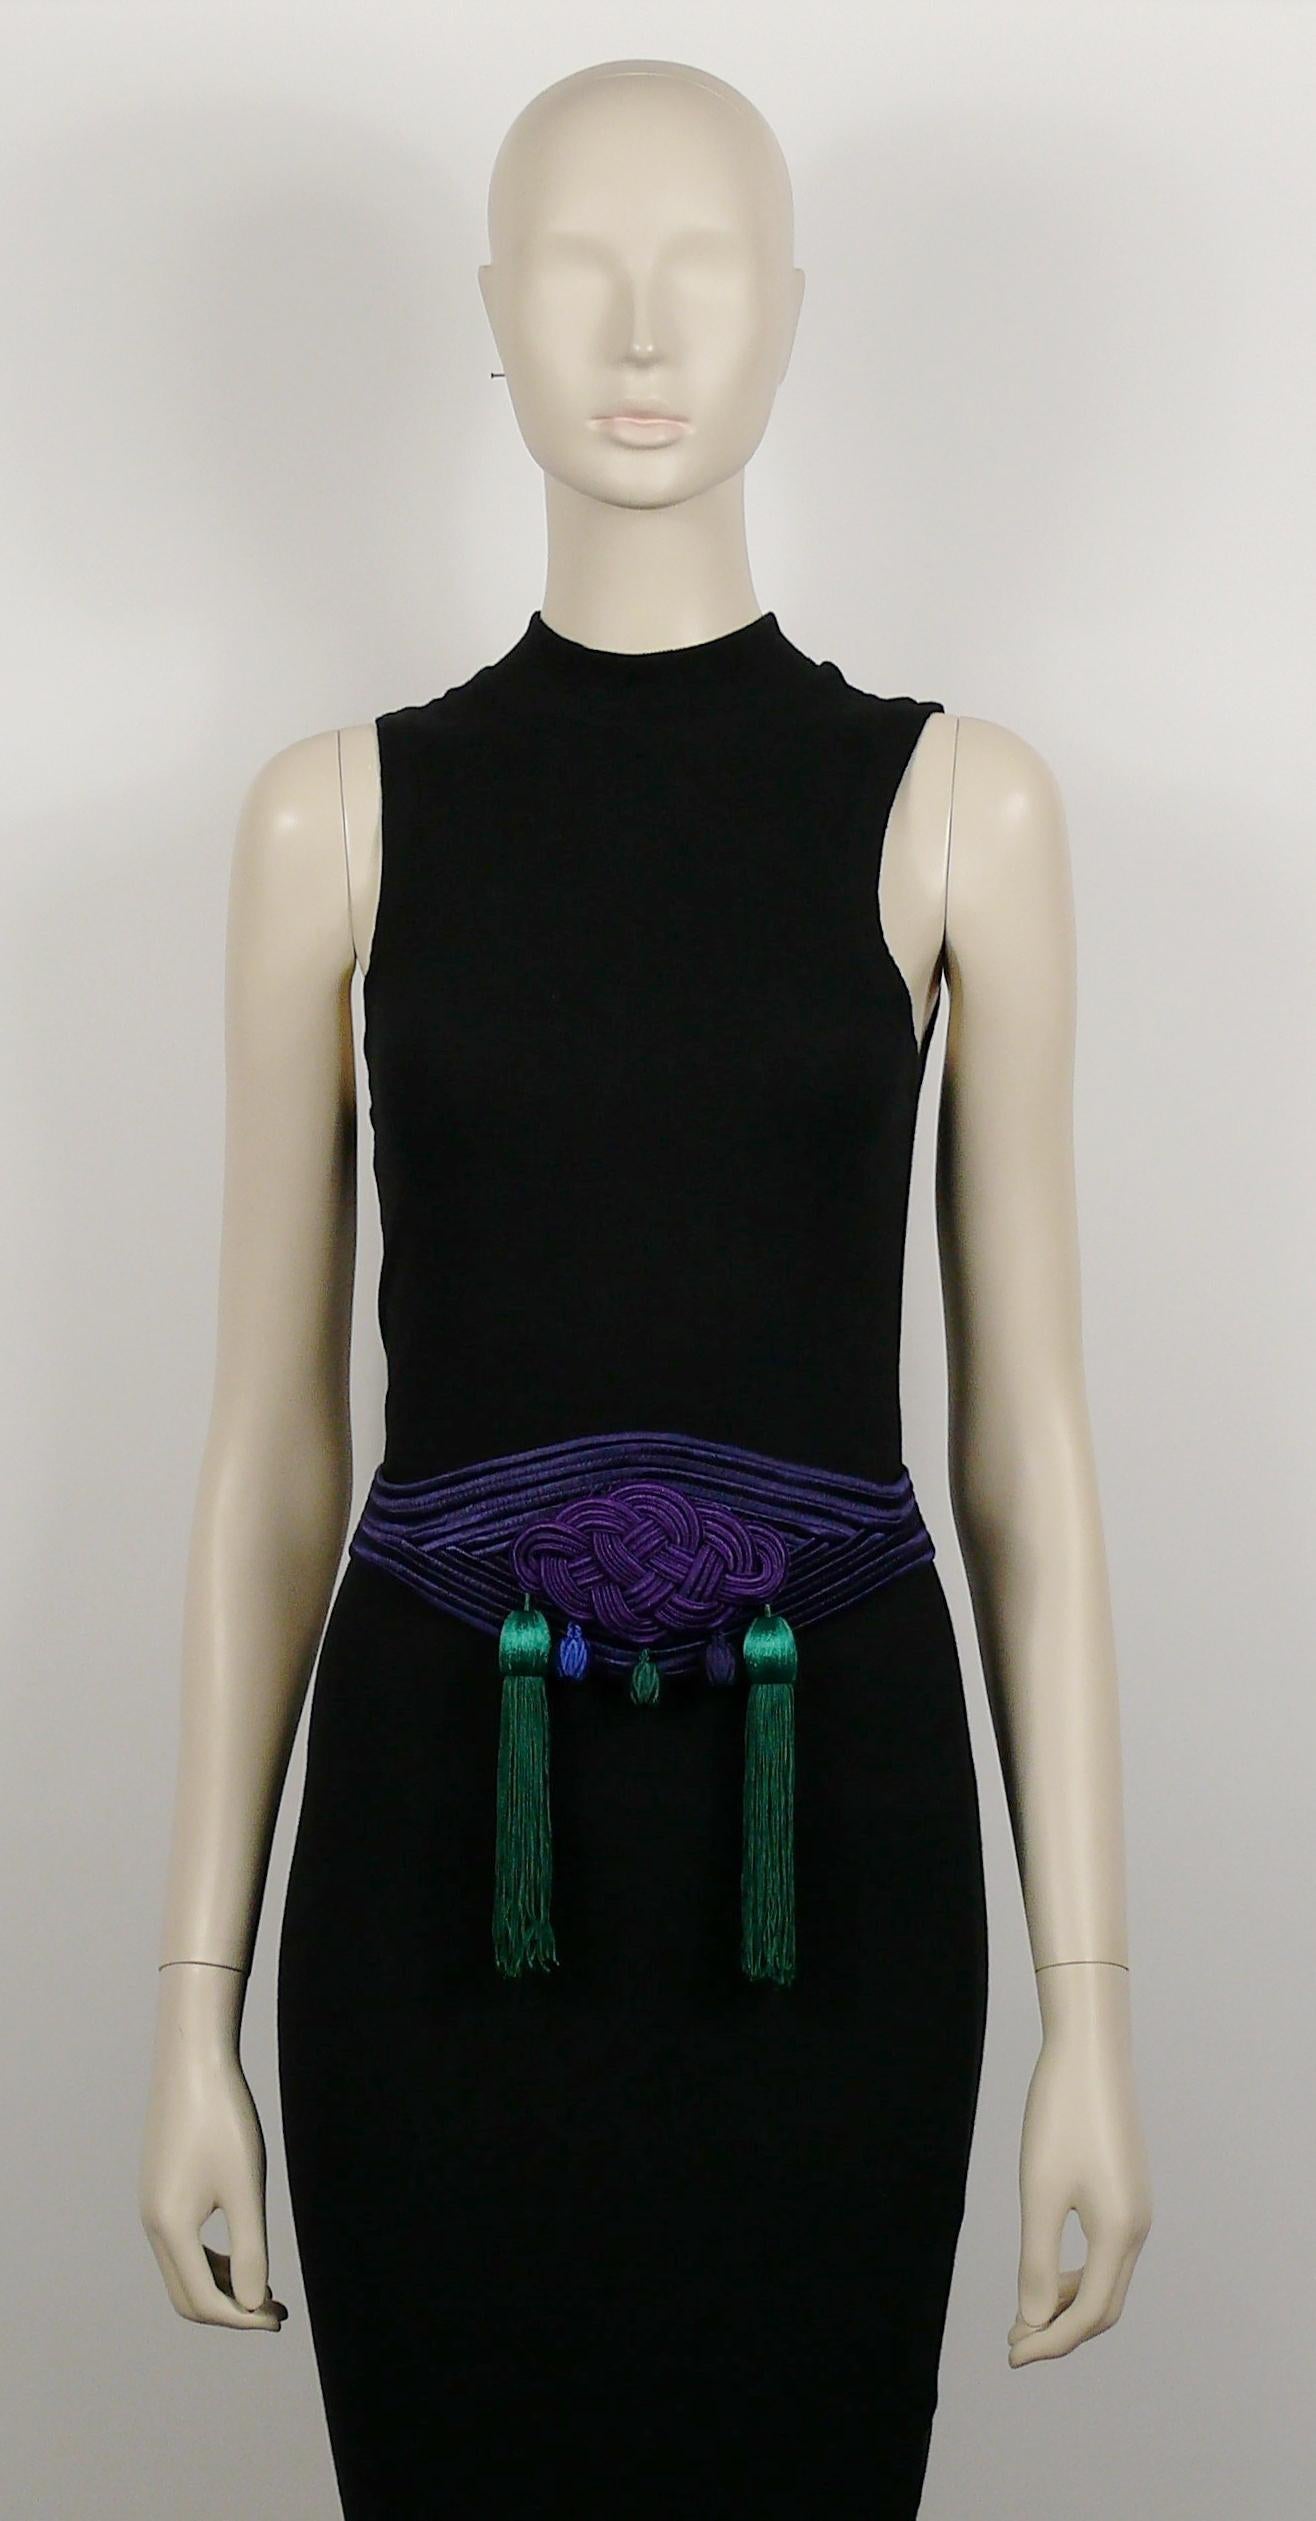 YVES SAINT LAURENT Rive Gauche vintage belt featuring colourful passementerie trimmings in shades of purple, accentuated with green tassels.

Snap and hook closures at the back.

Embossed YVES SAINT LAURENT Rive Gauche Made in France on a metal hang